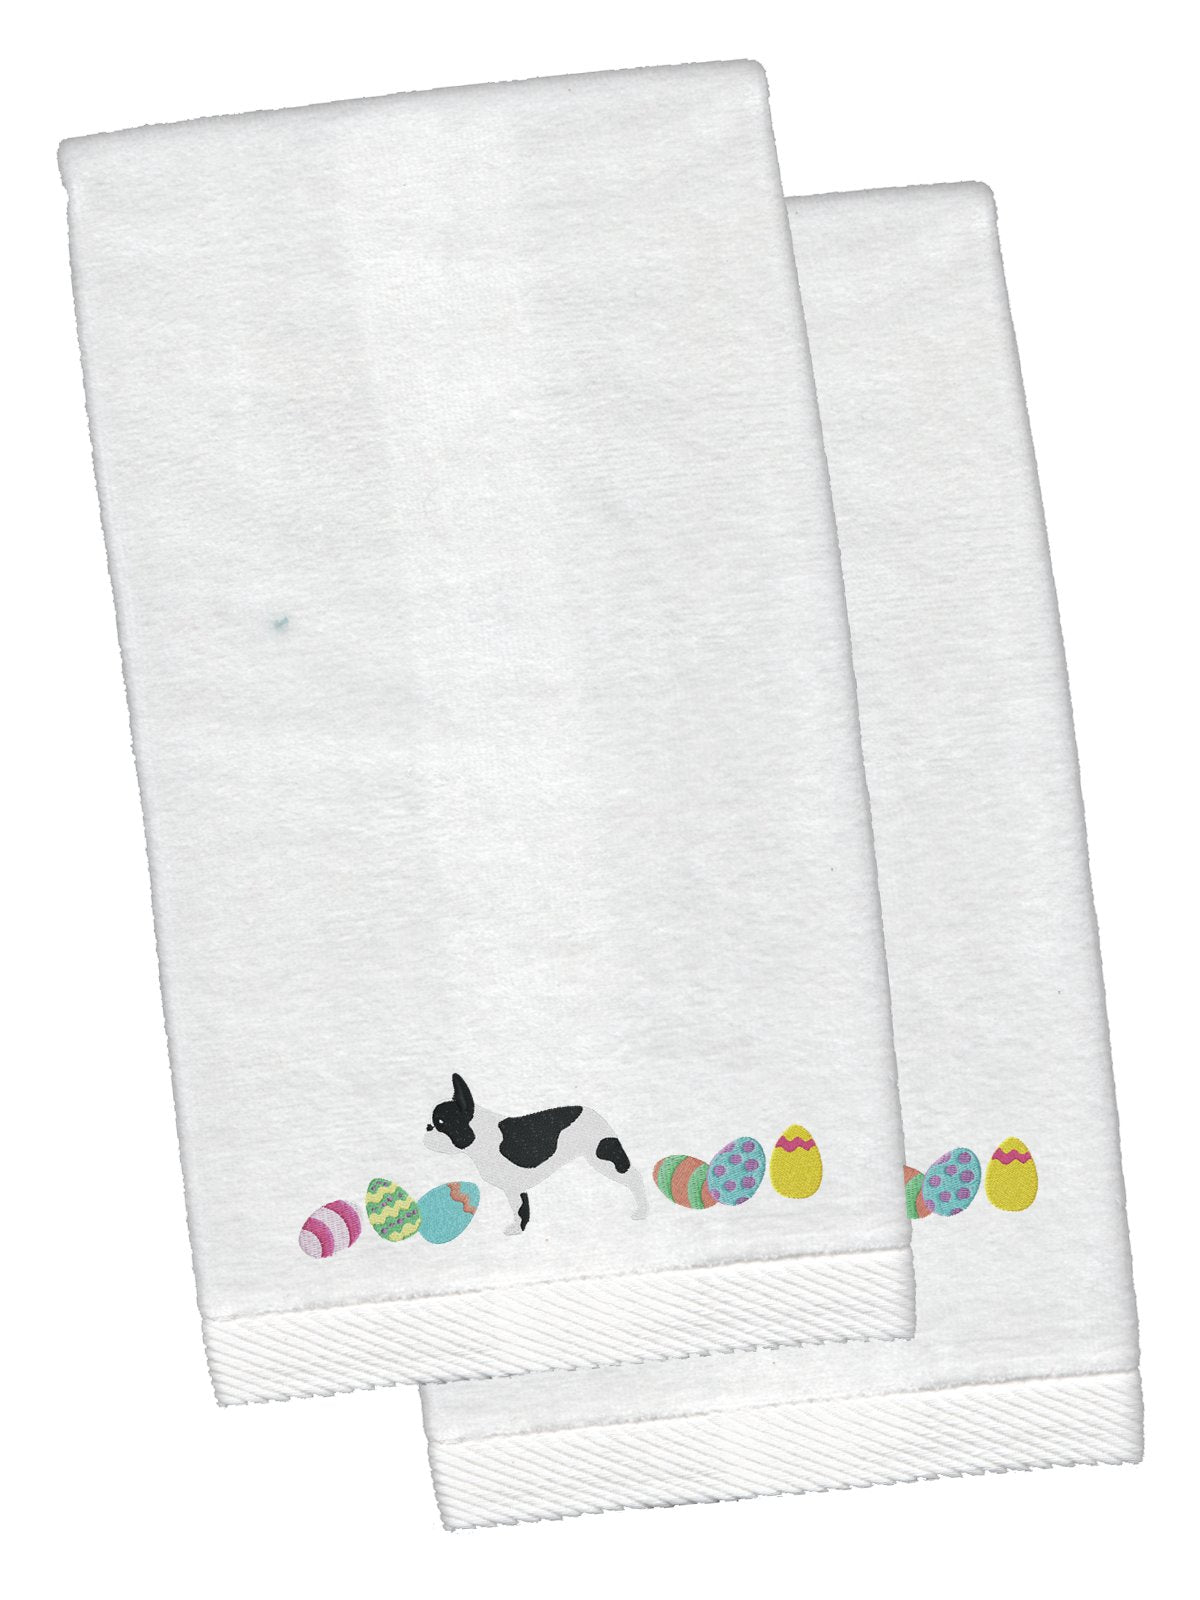 French Bulldog Easter White Embroidered Plush Hand Towel Set of 2 CK1642KTEMB by Caroline's Treasures